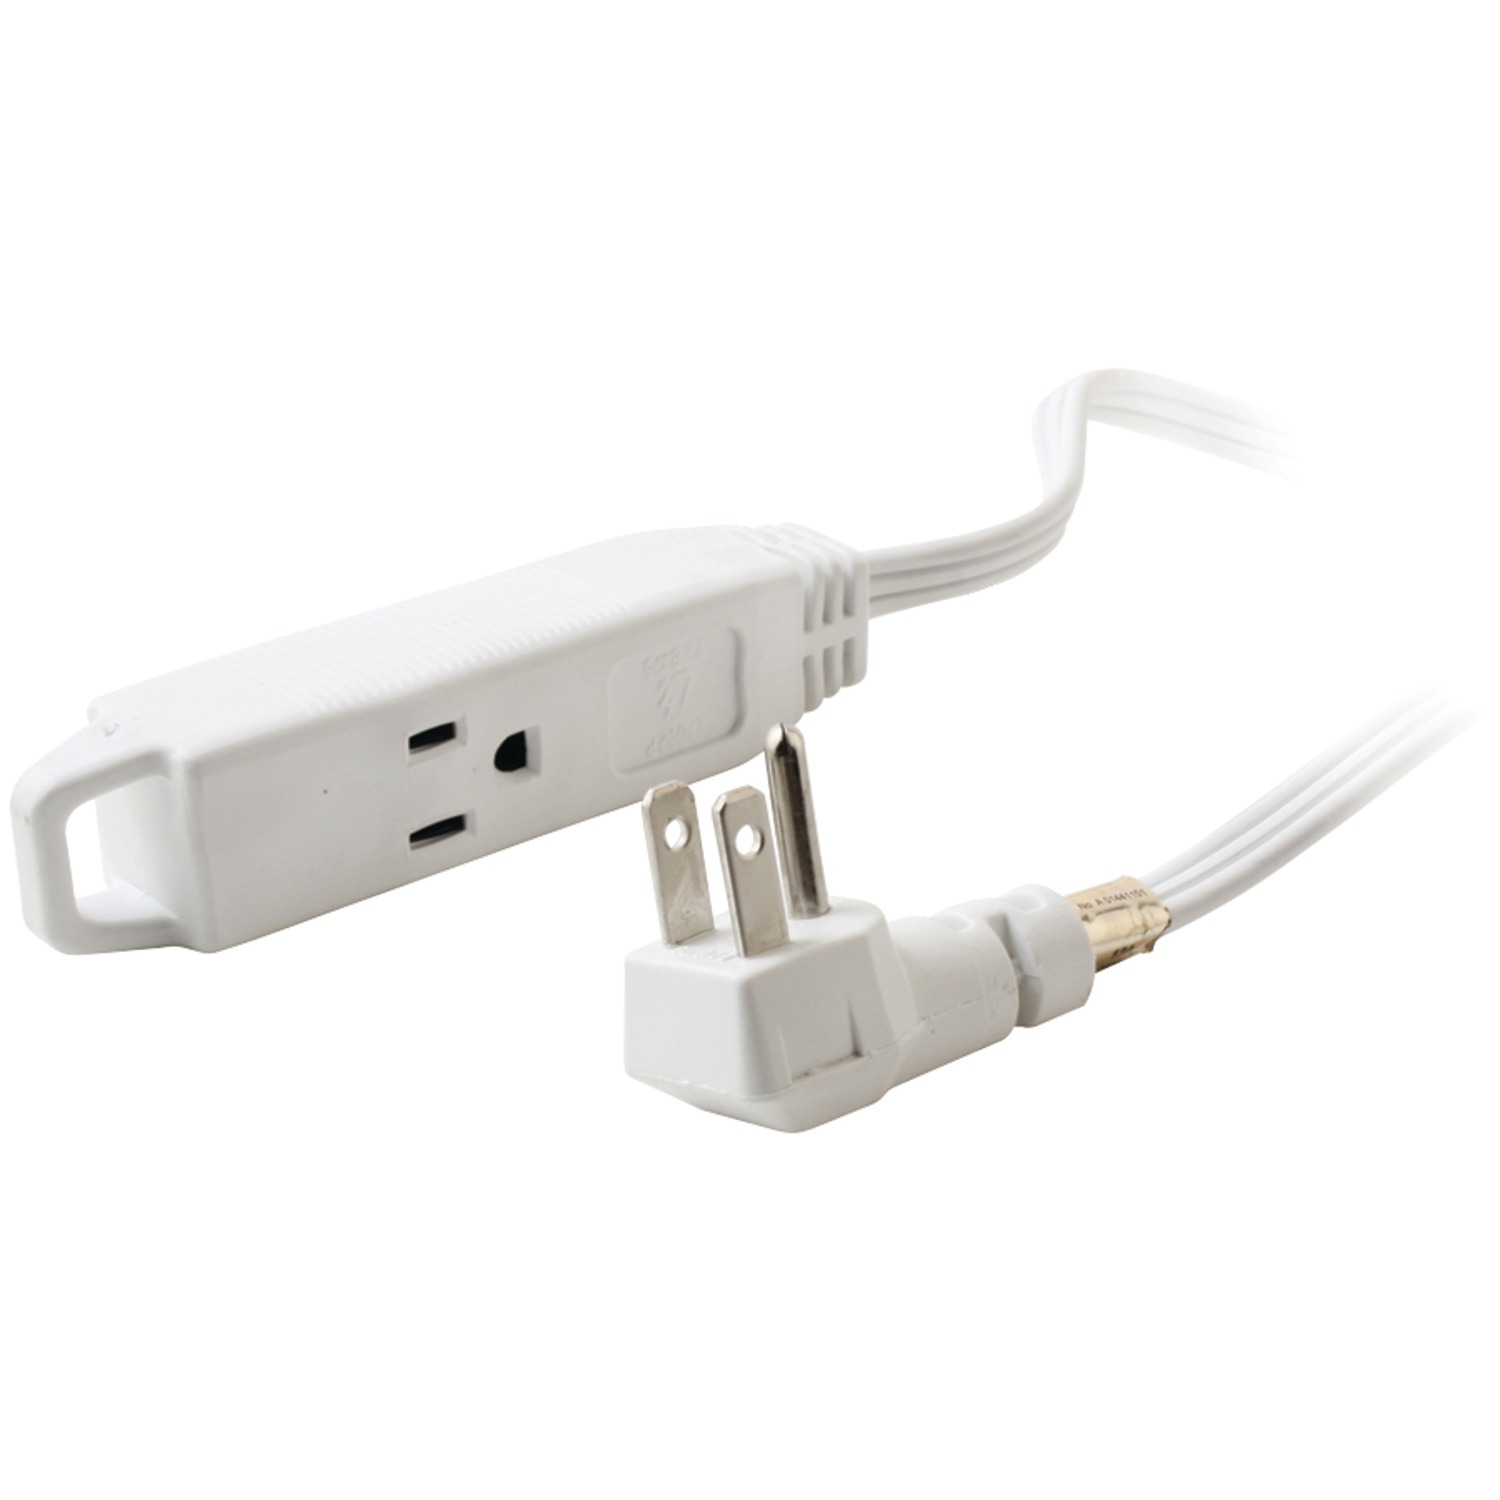 Axis 3-outlet Indoor Extension Cord, 8ft (white) 4 Pack - image 4 of 11